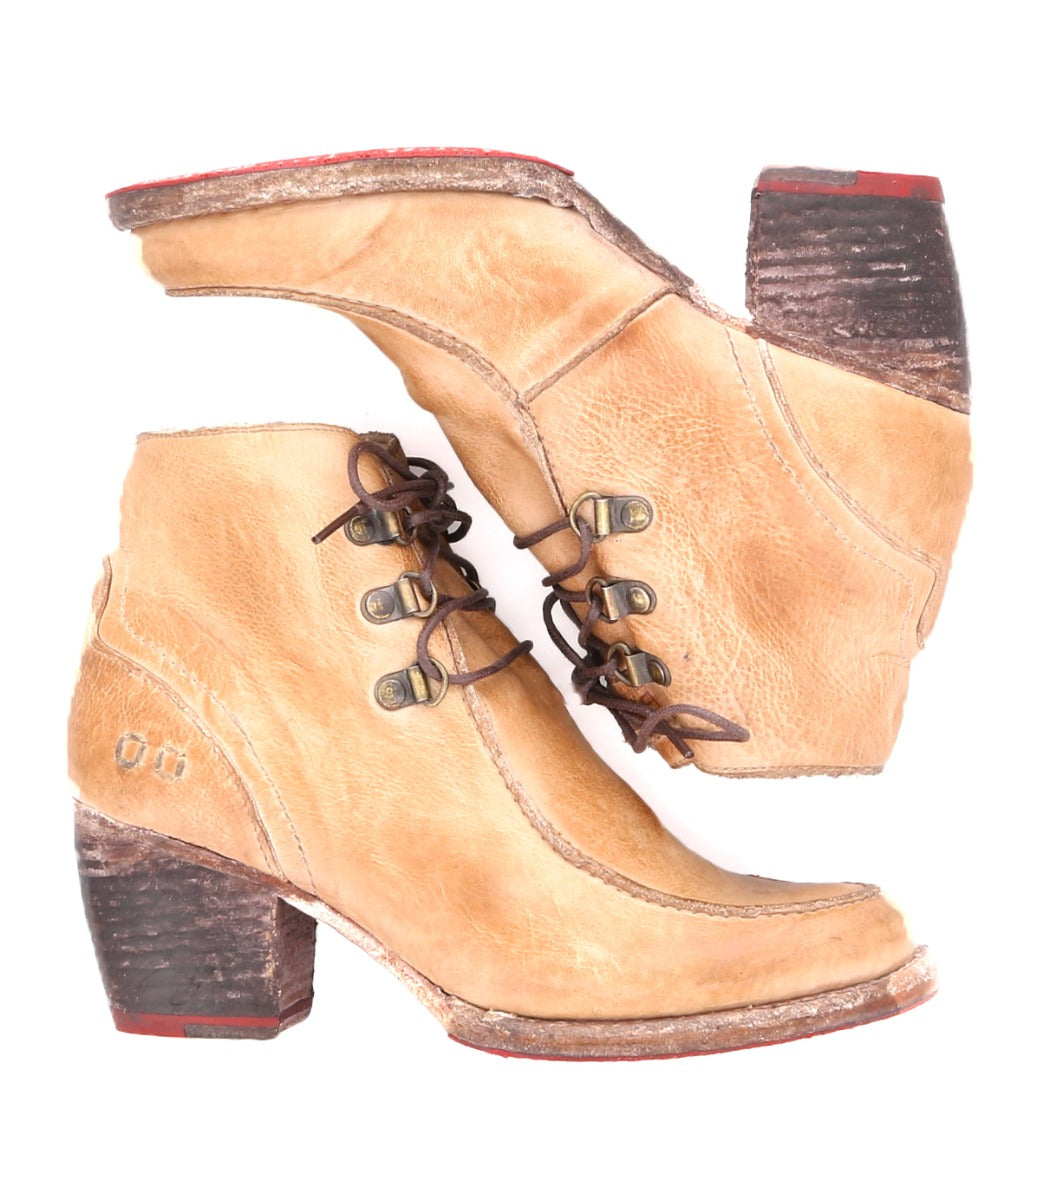 A pair of Mage boots by Bed Stu for women, on a white background.